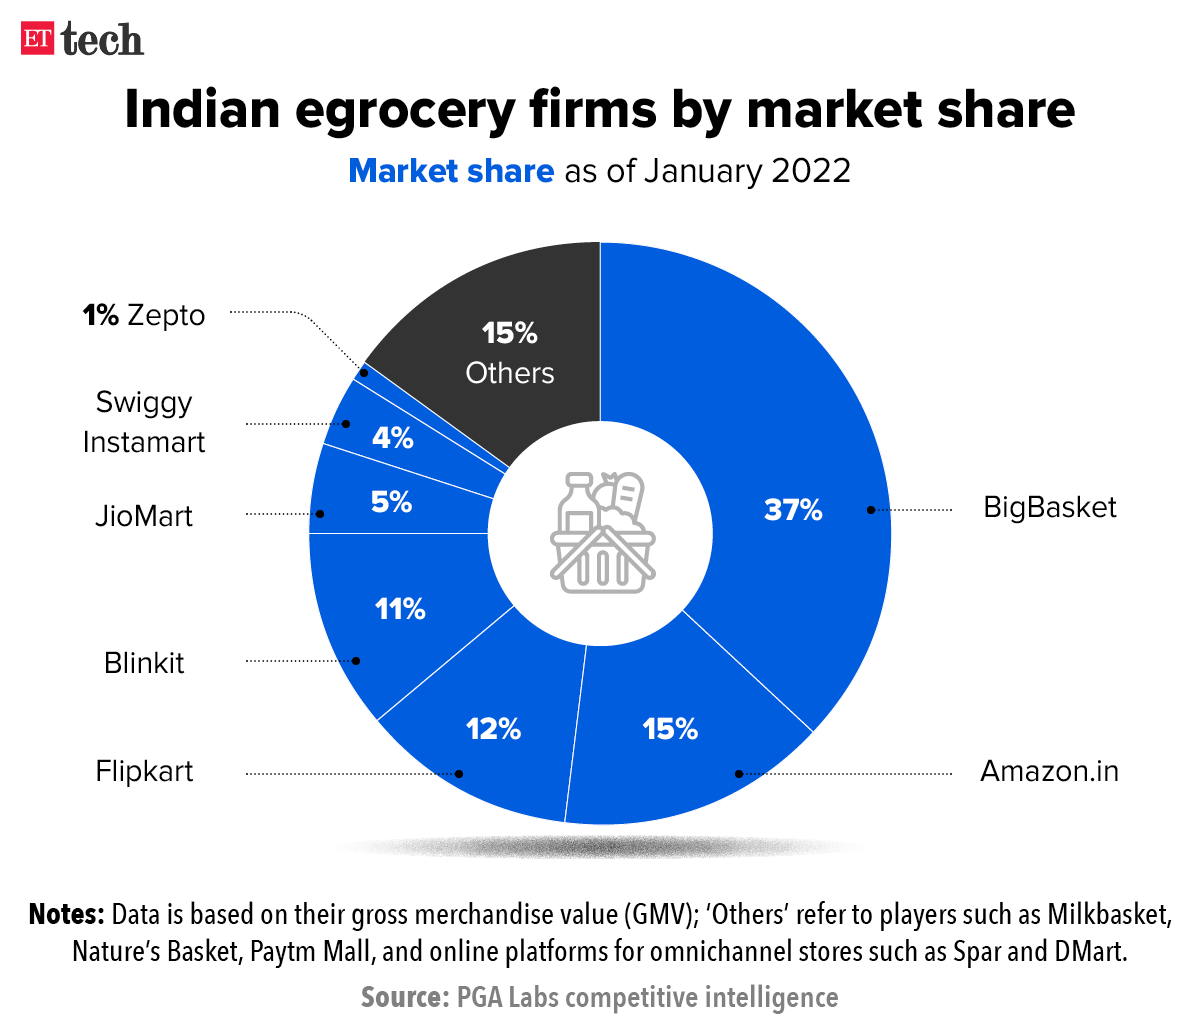 eGrocery firms market share